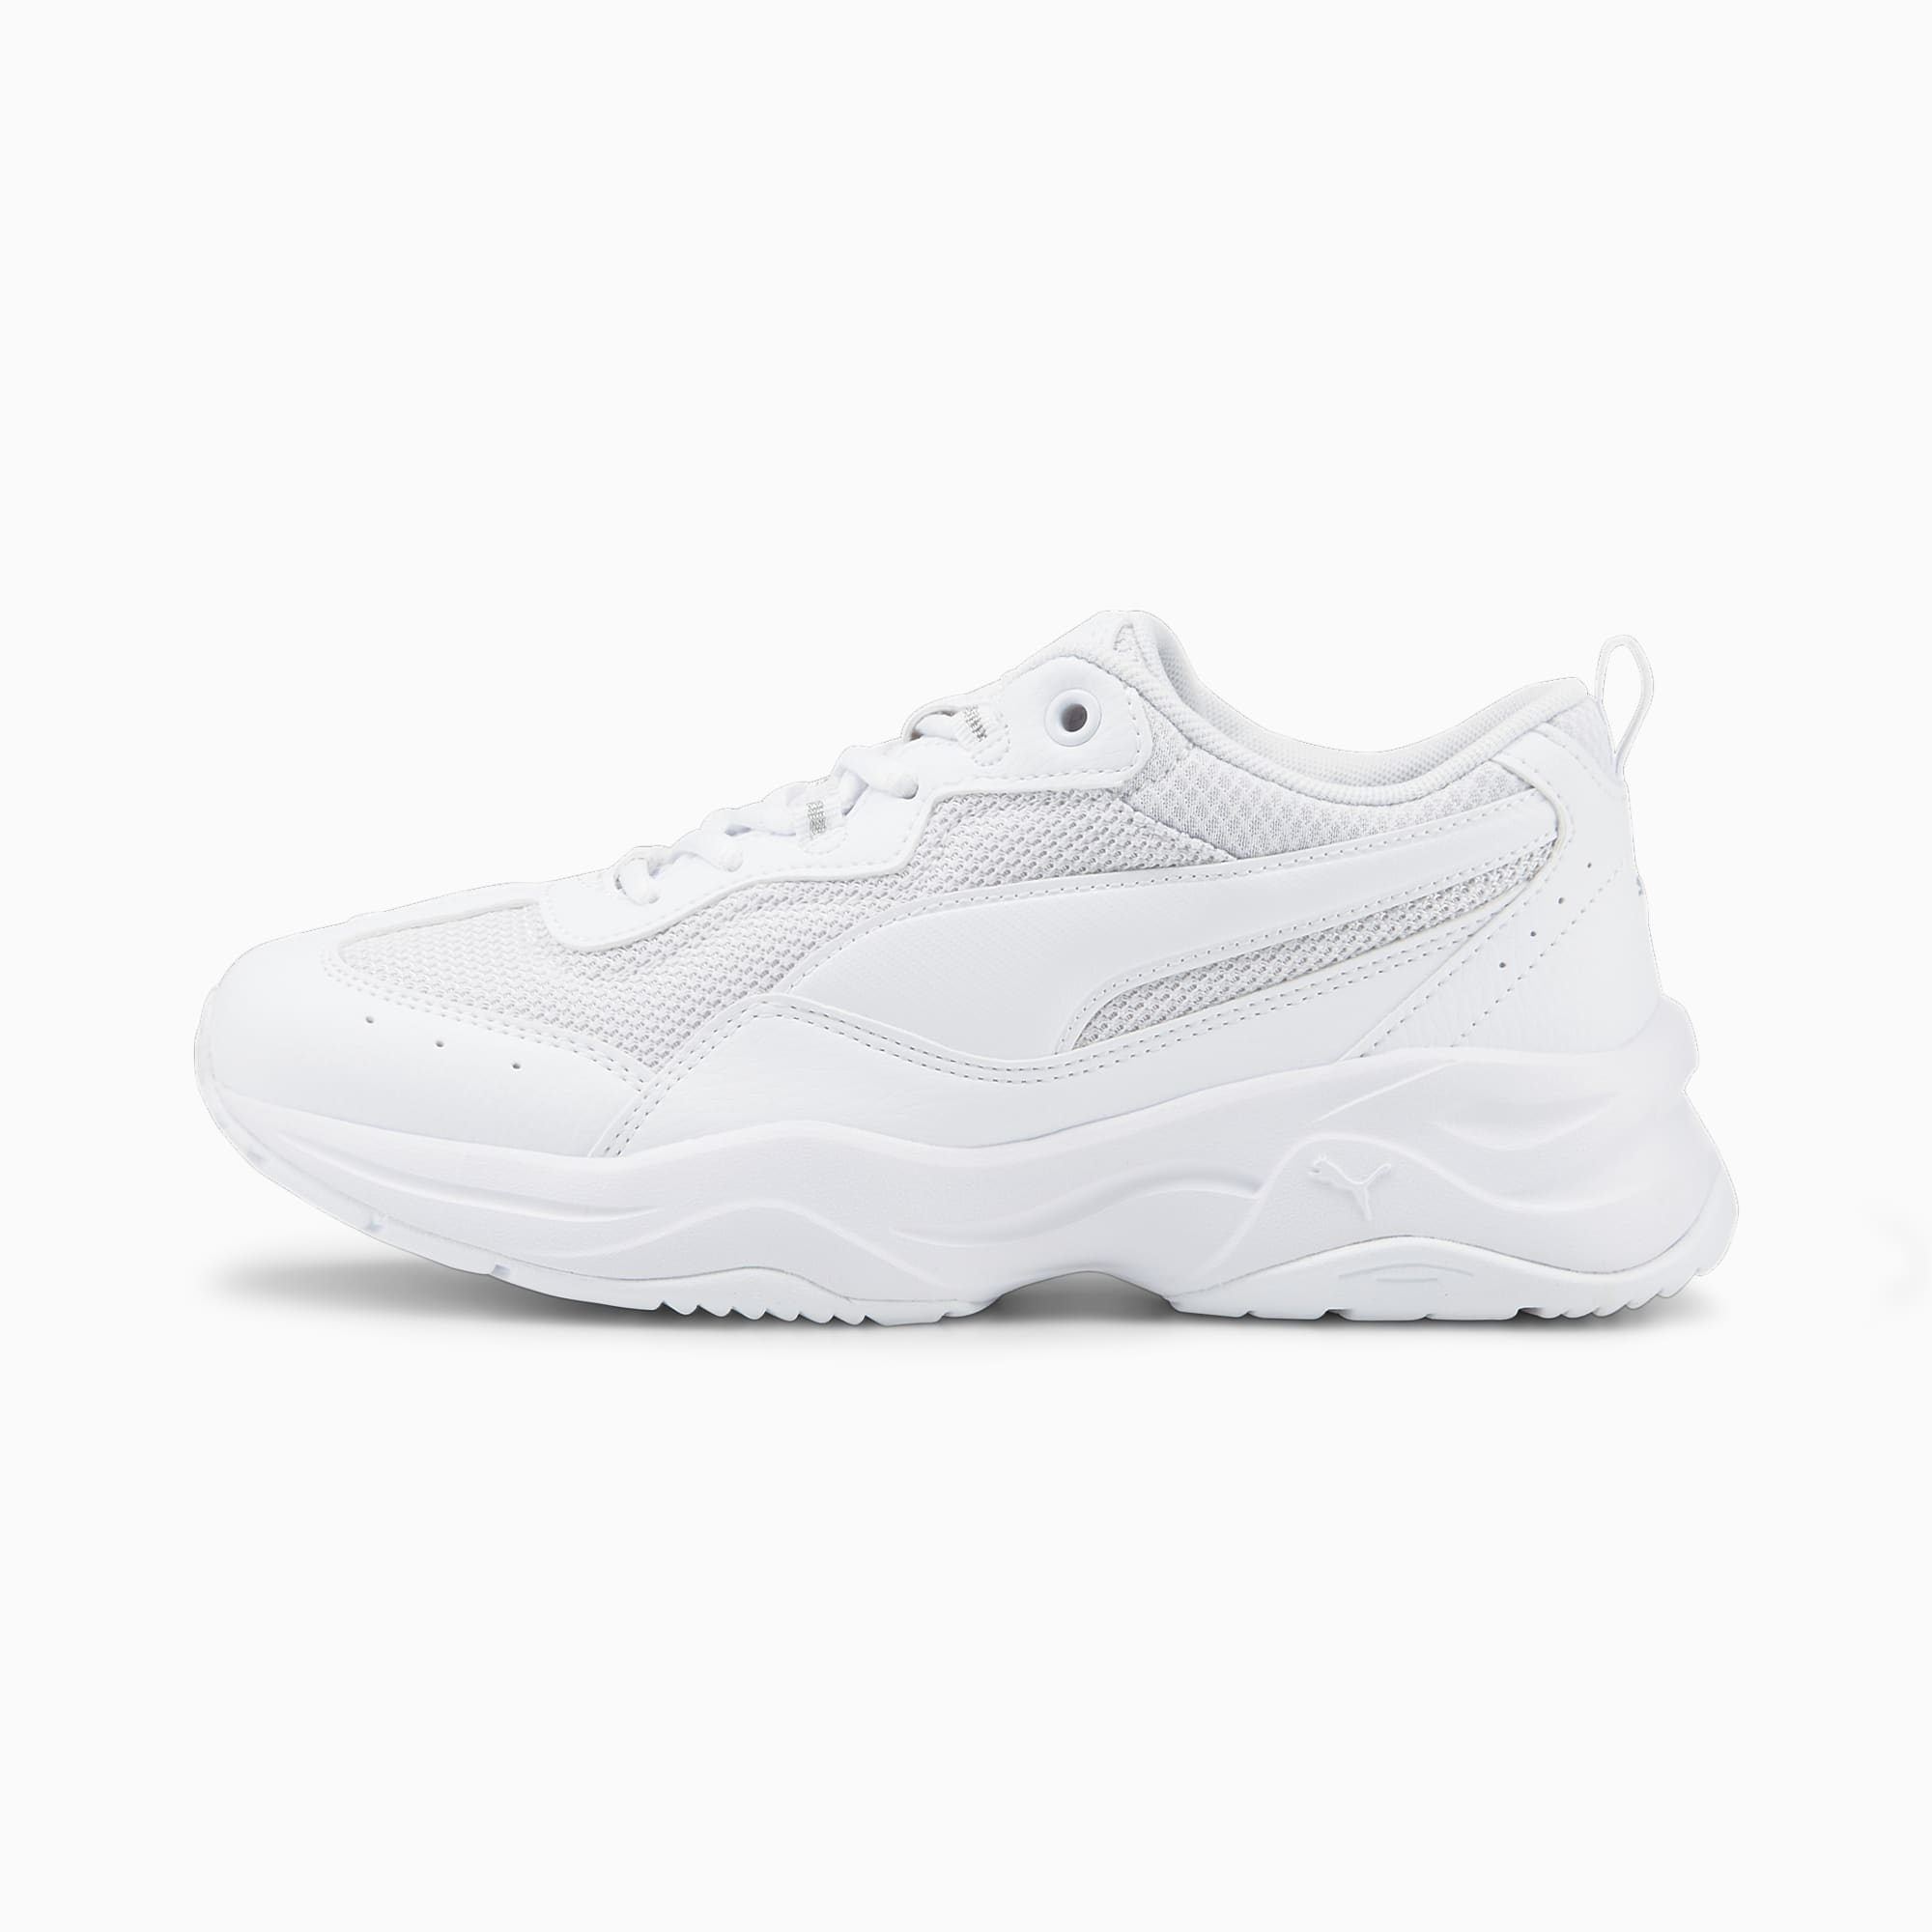 Shoes, Clothing Accessories | PUMA